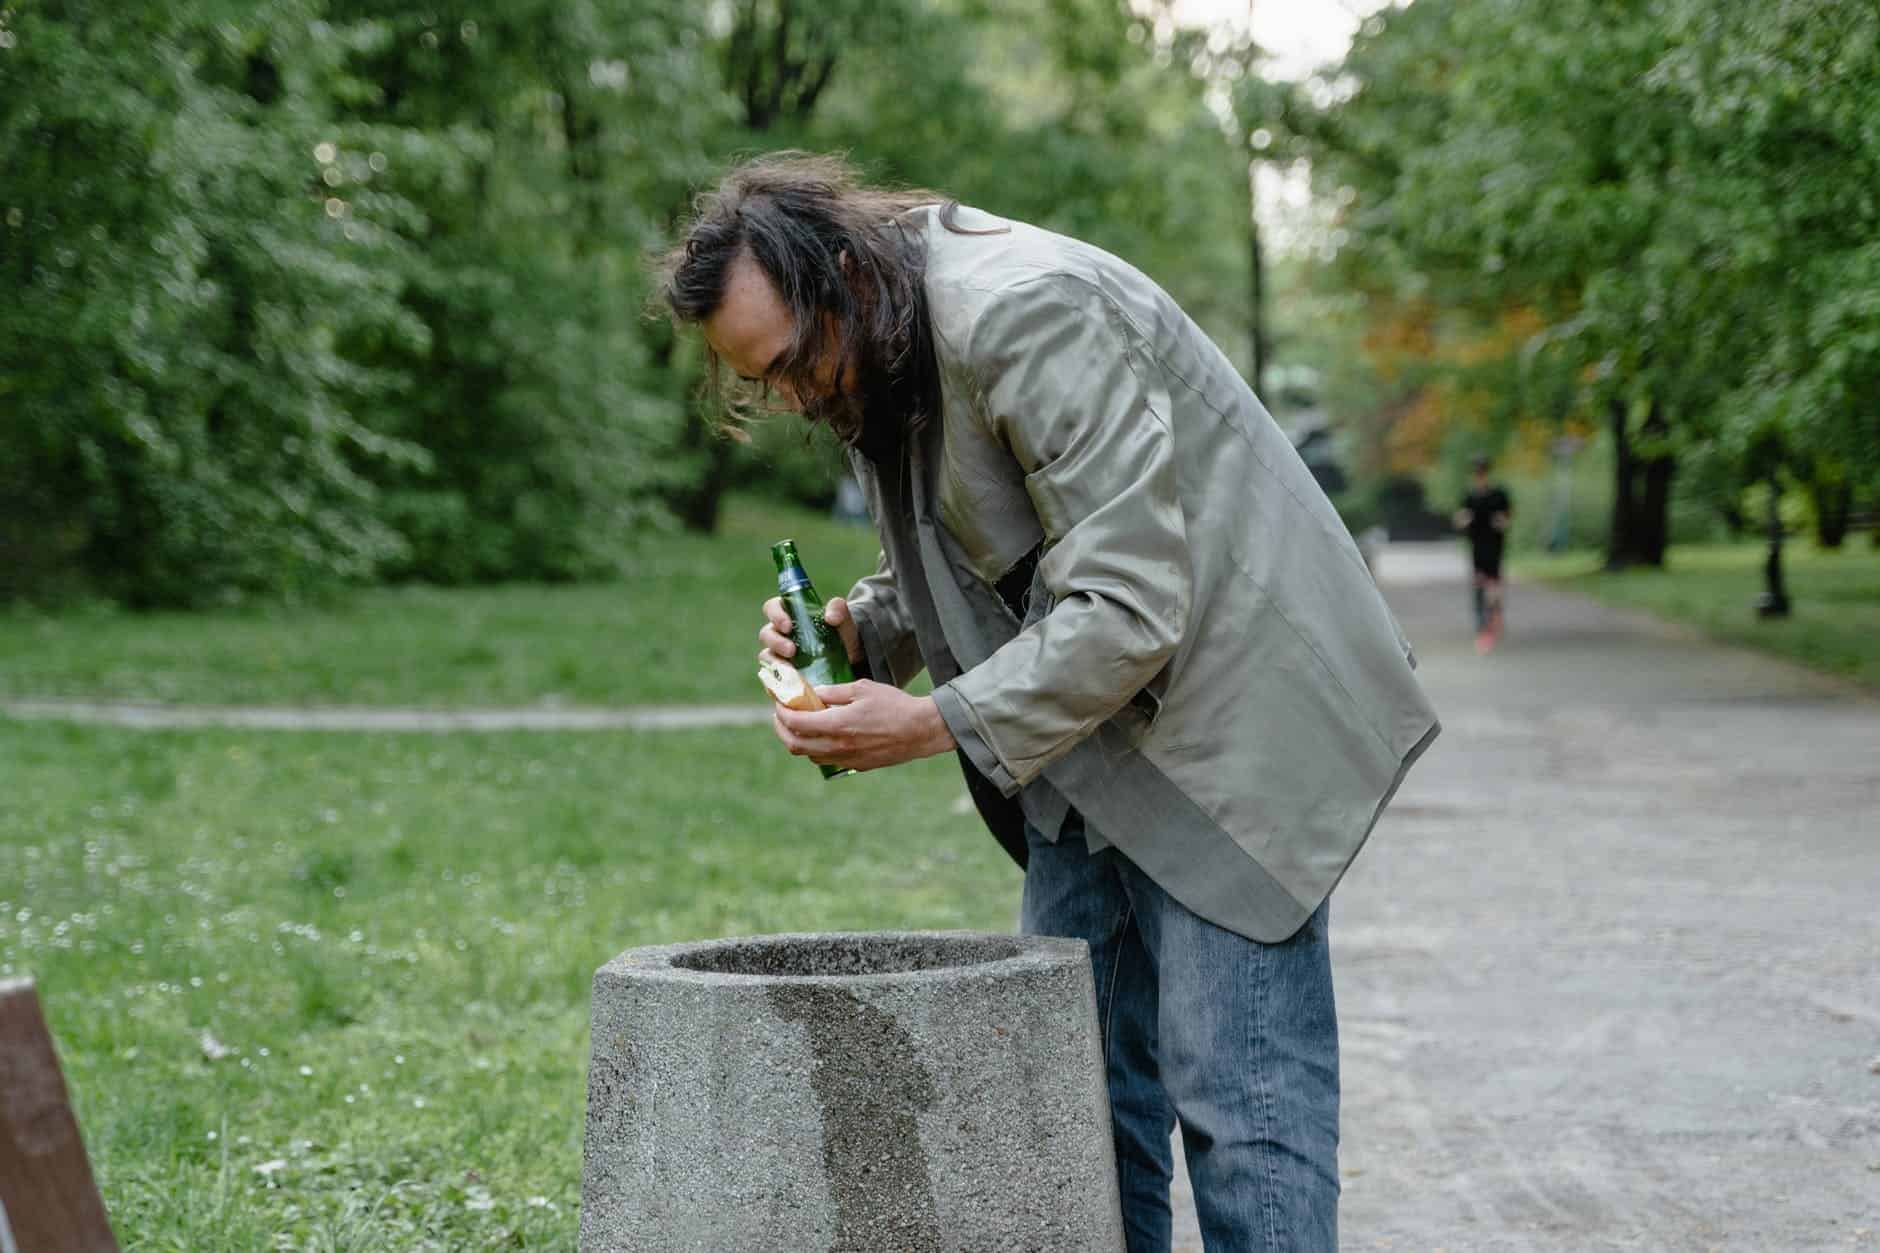 Switzerland’s large number of homeless